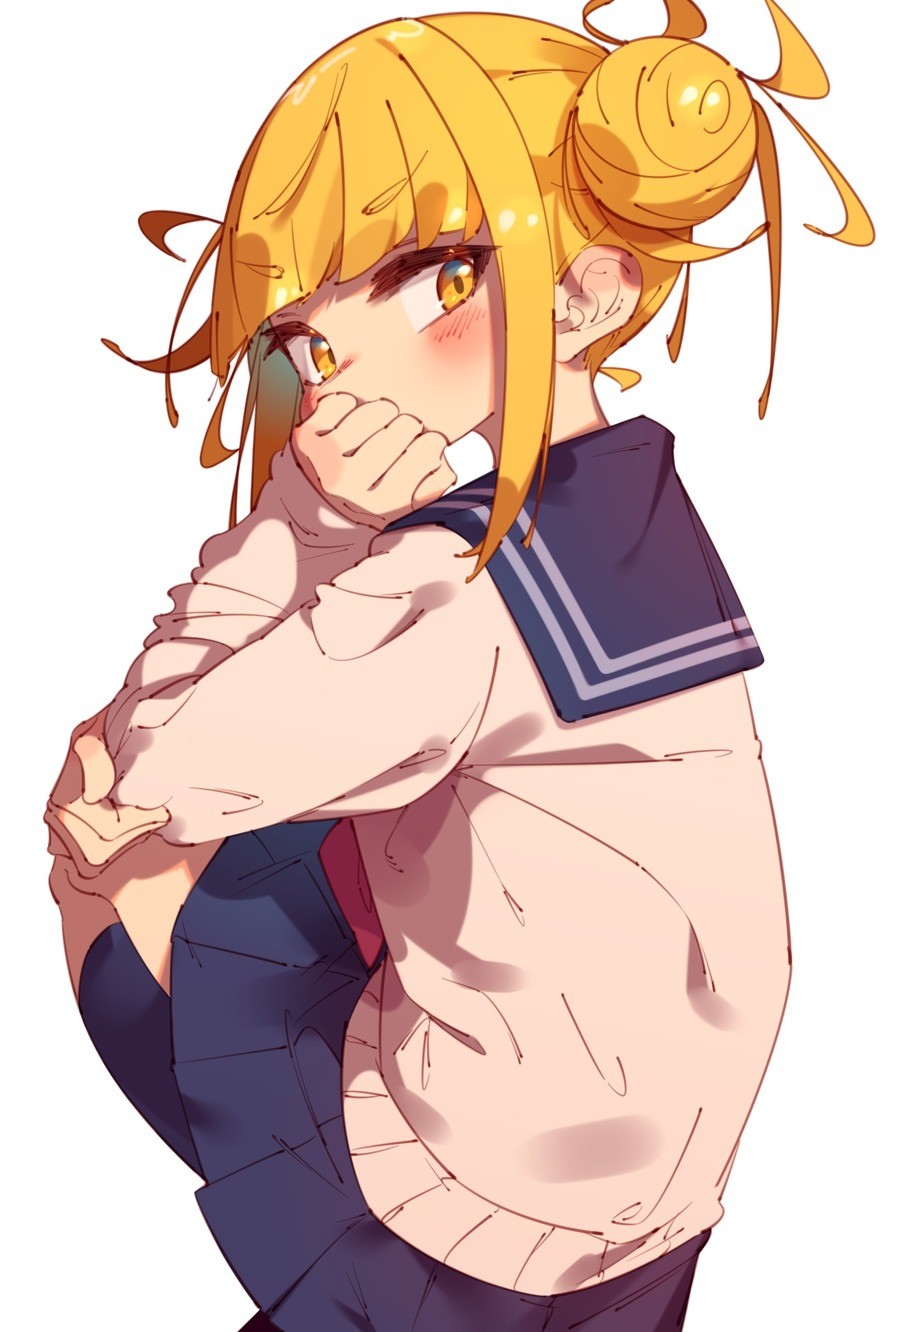 Daily Toga - 806: Just Toga. join list: DailyToga (477 subs)Mention History Source: .. that's all you ever need